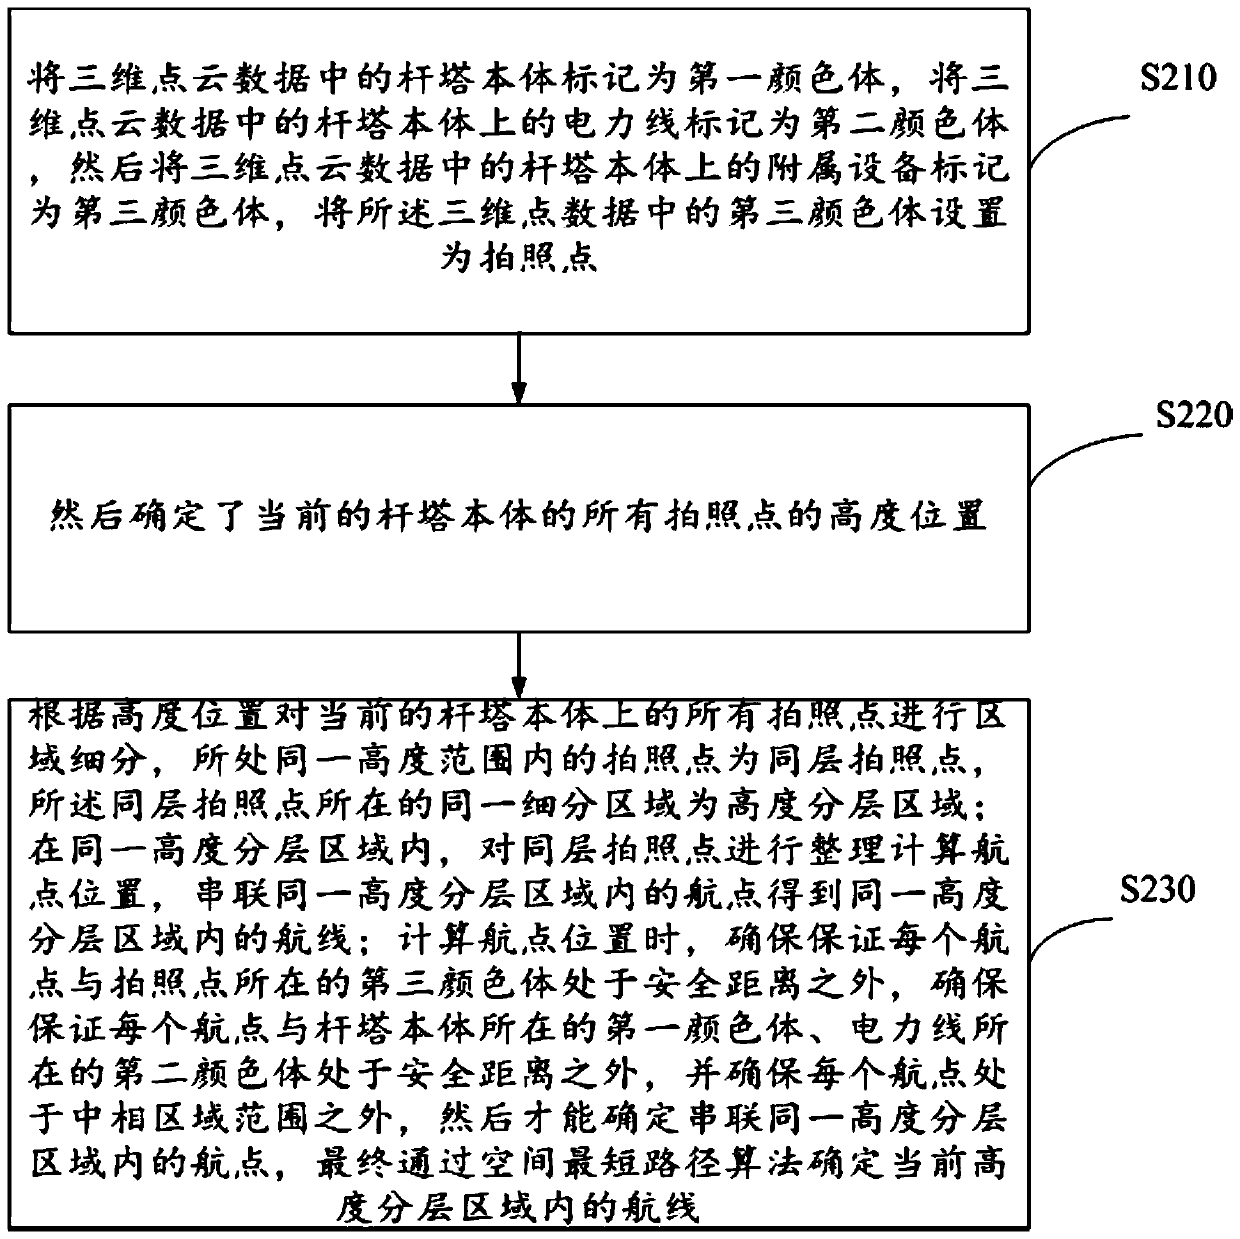 Intelligent route planning method for refined inspection of power transmission line